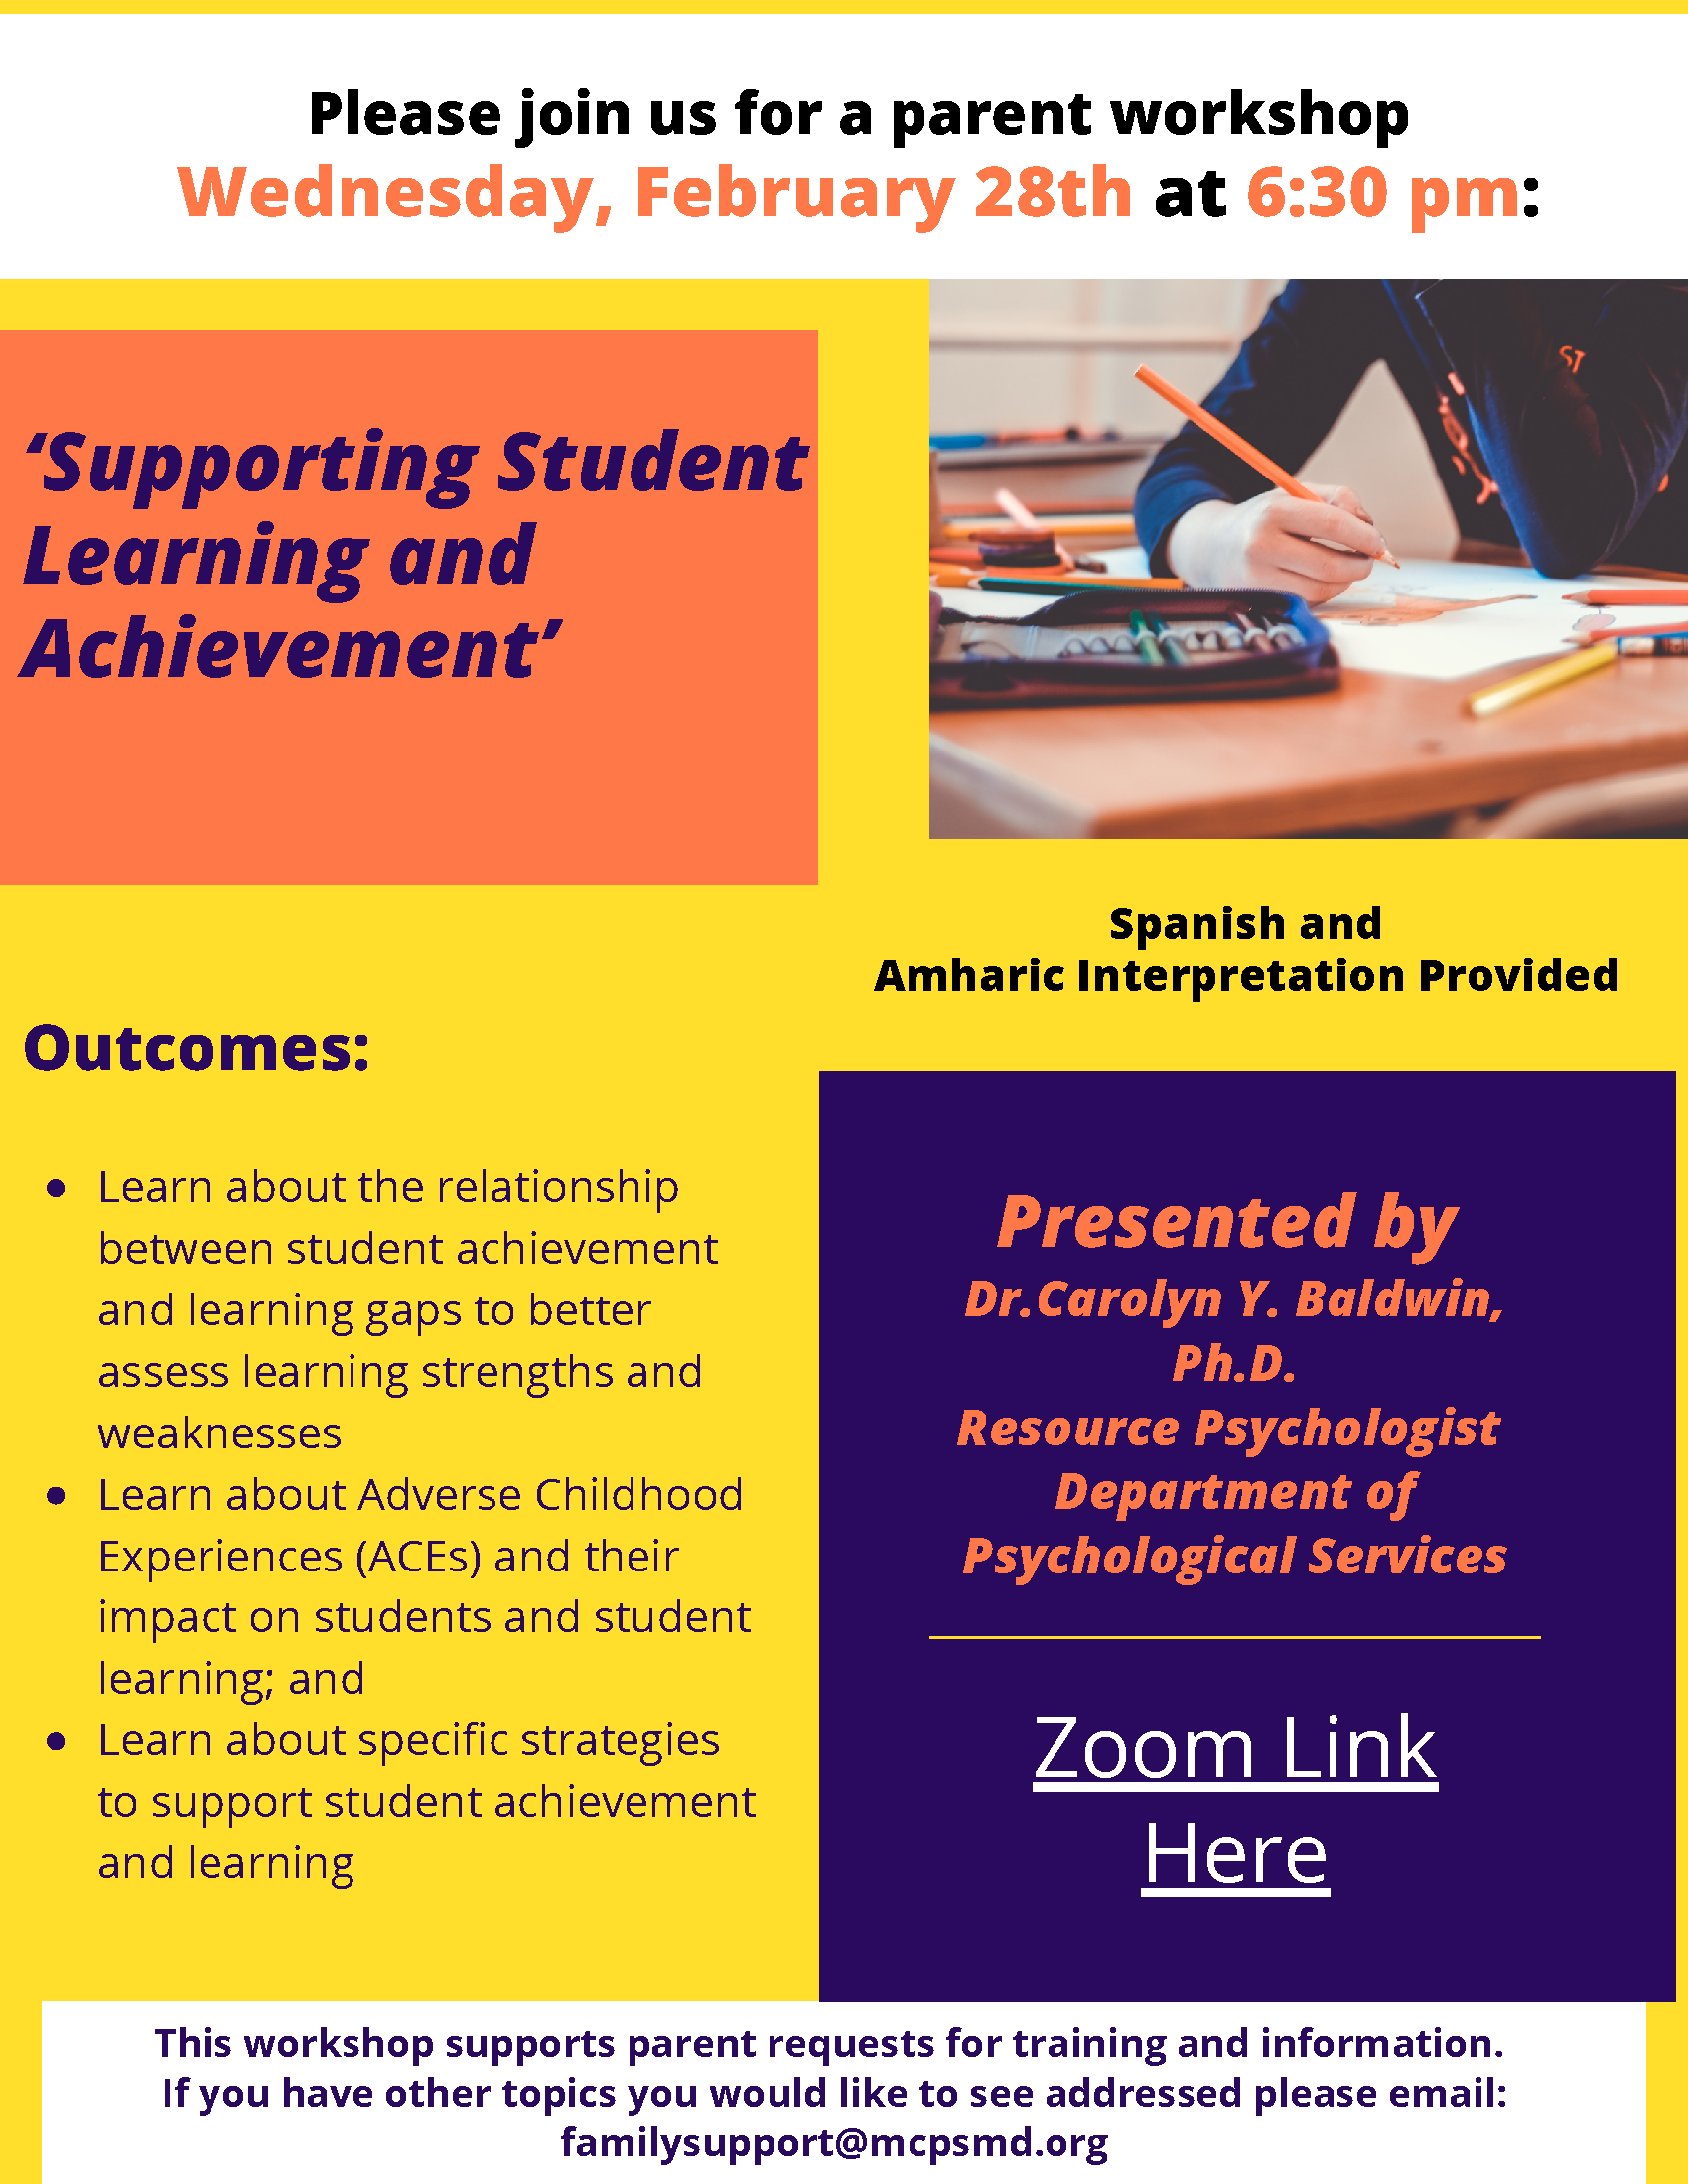 Supporting Student Learning and Achievement.png